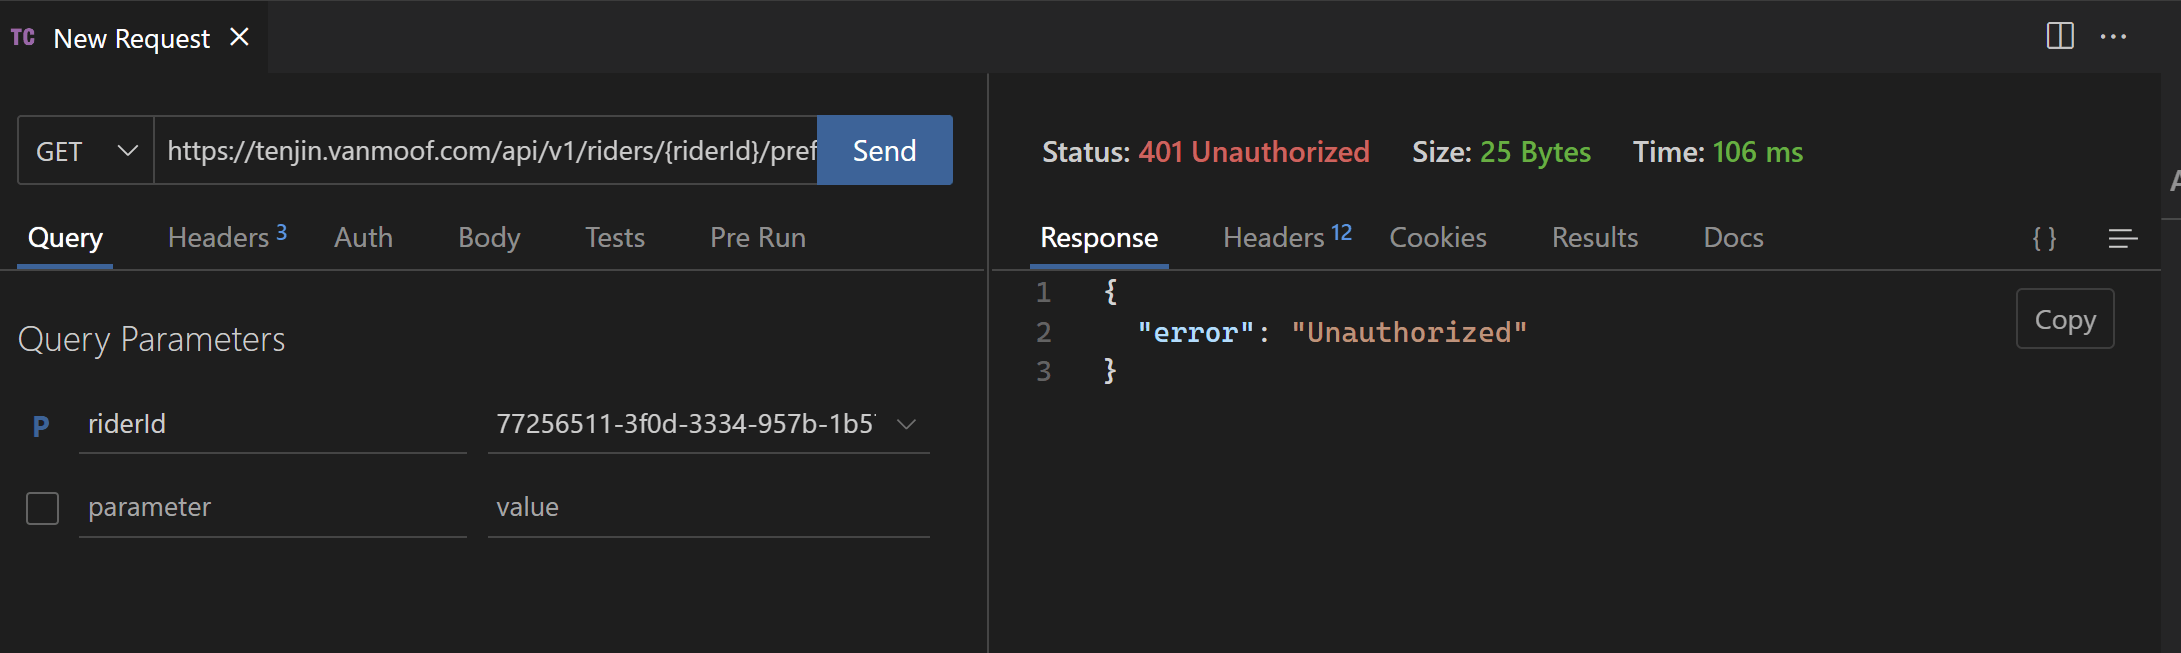 Screenshot if REST API call in Visual Studio Code using the Thunder Client extension with an error message with value Unauthorized